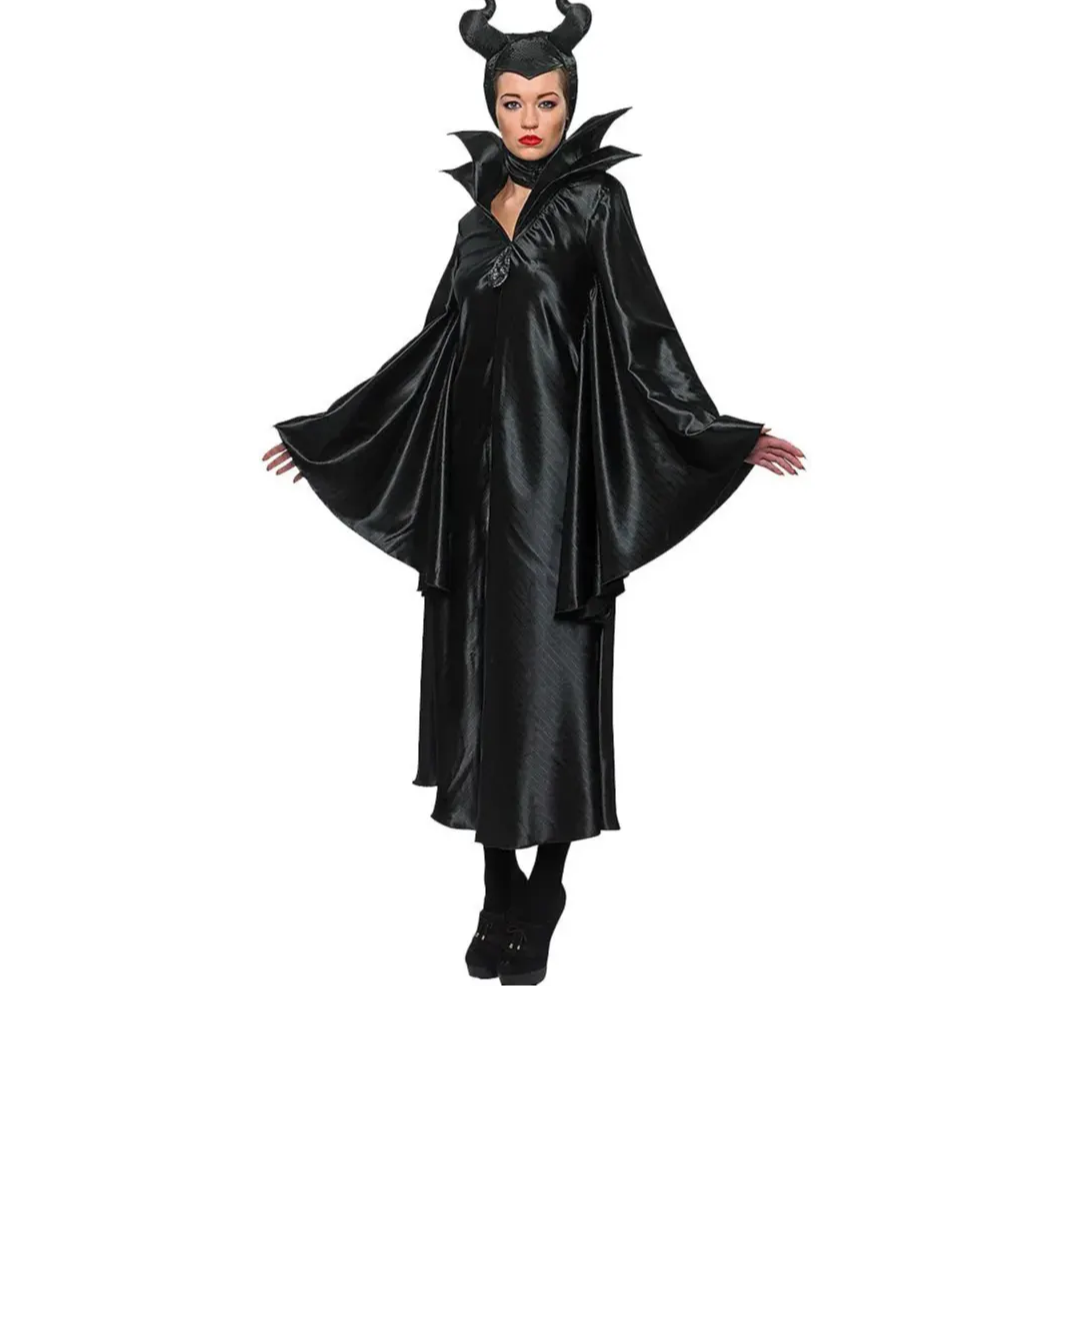 Woman wearing Disney Maleficent costume, red lipstick, black tights and shoes. 